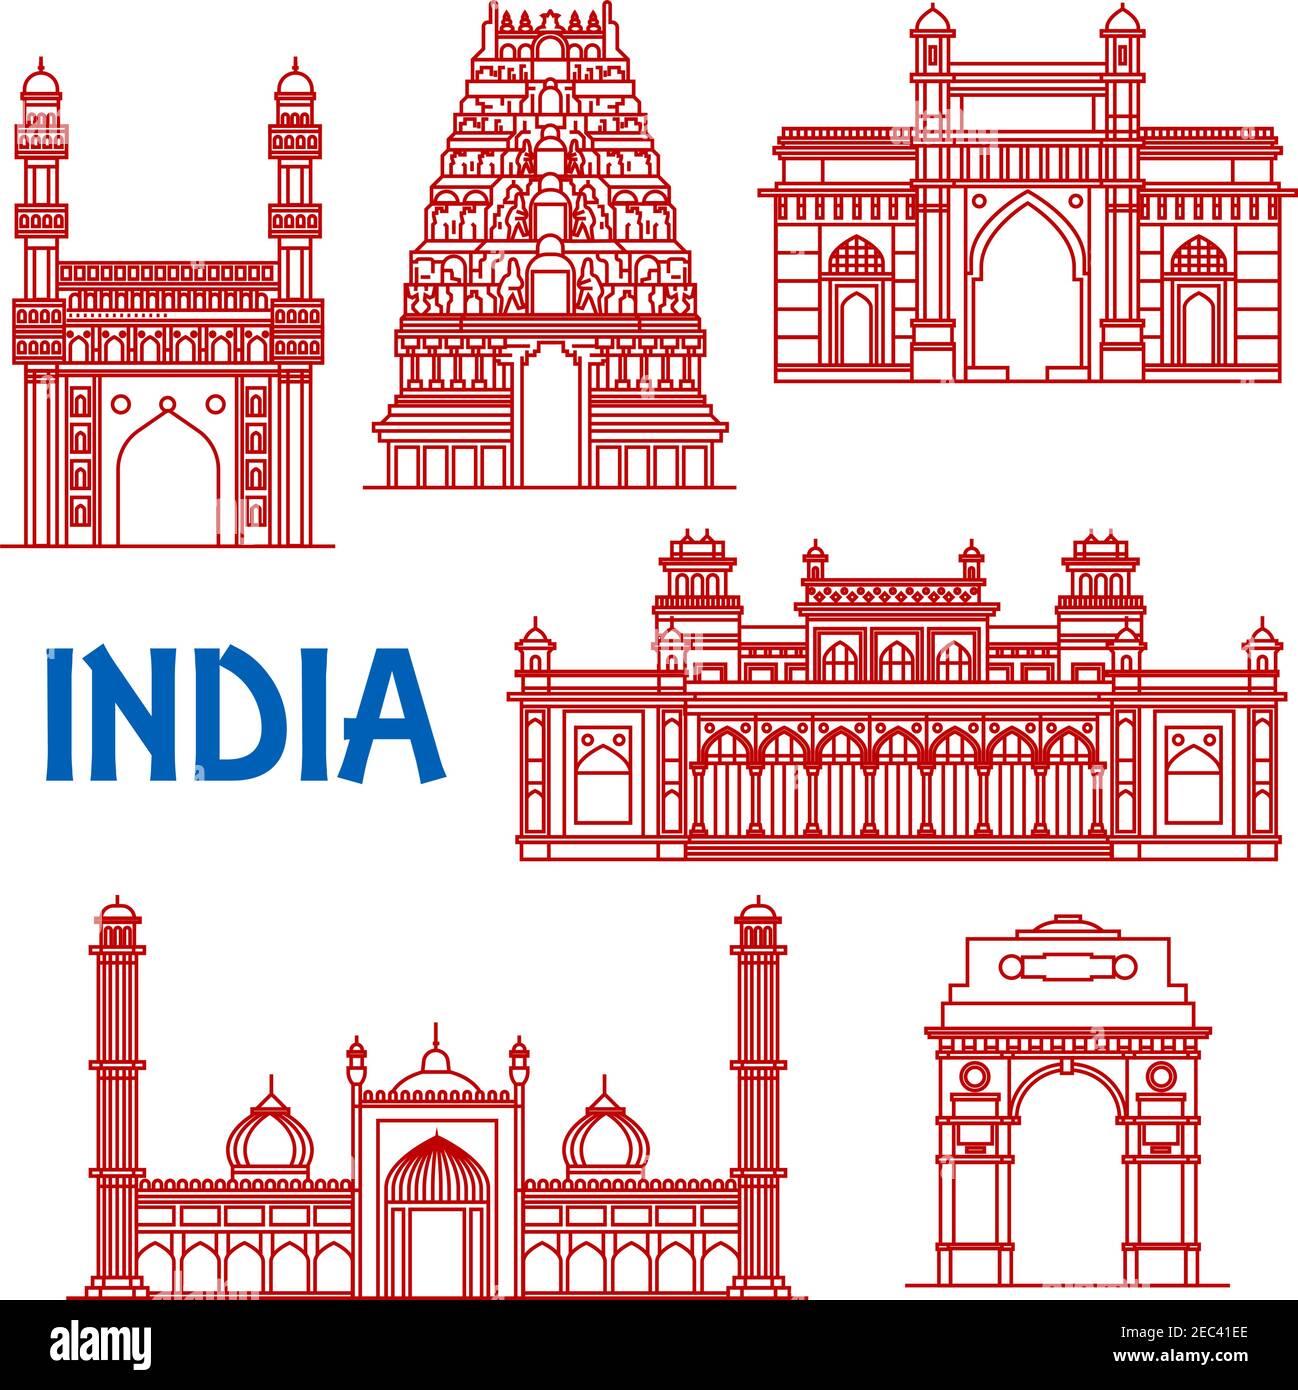 Popular indian architecture landmarks icon with red thin line symbols of India Gate and Meenakshi temple, Gateway of India and Jama Masjid mosque, Cha Stock Vector